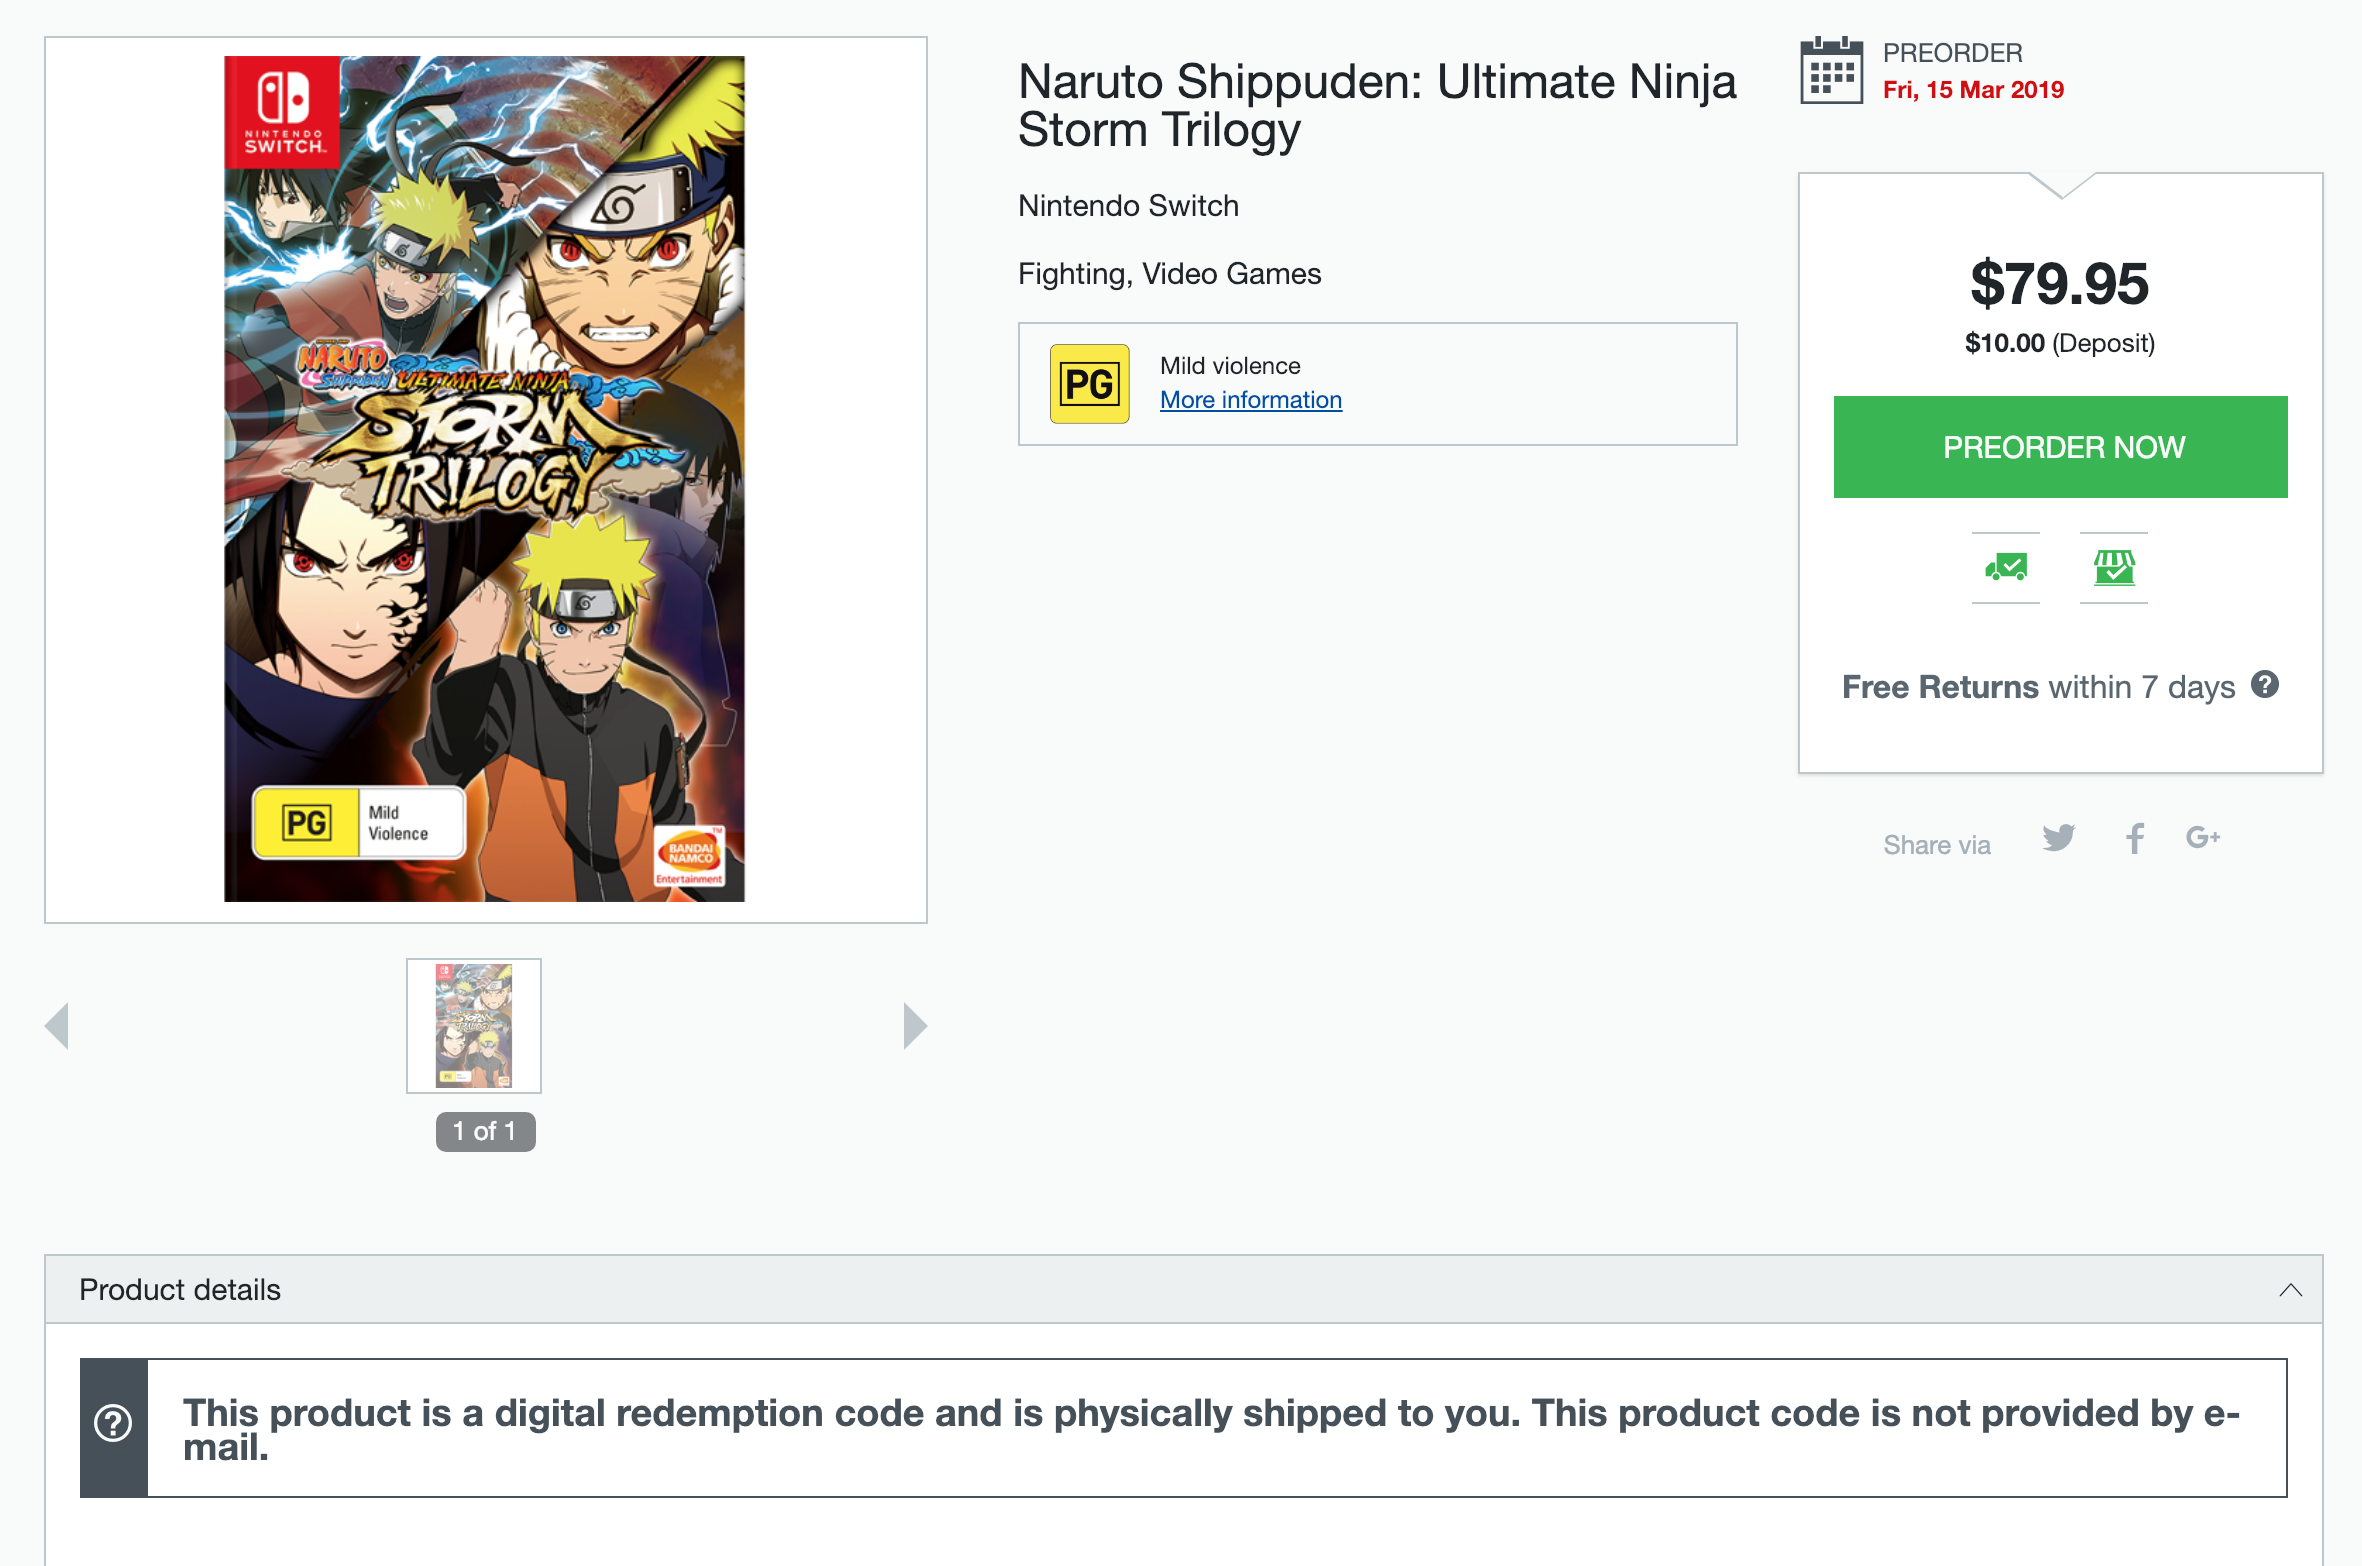 Shippuden: Naruto Require Ninja Australia Physical – In Trilogy NintendoSoup Three Download Ultimate Codes Storm Will